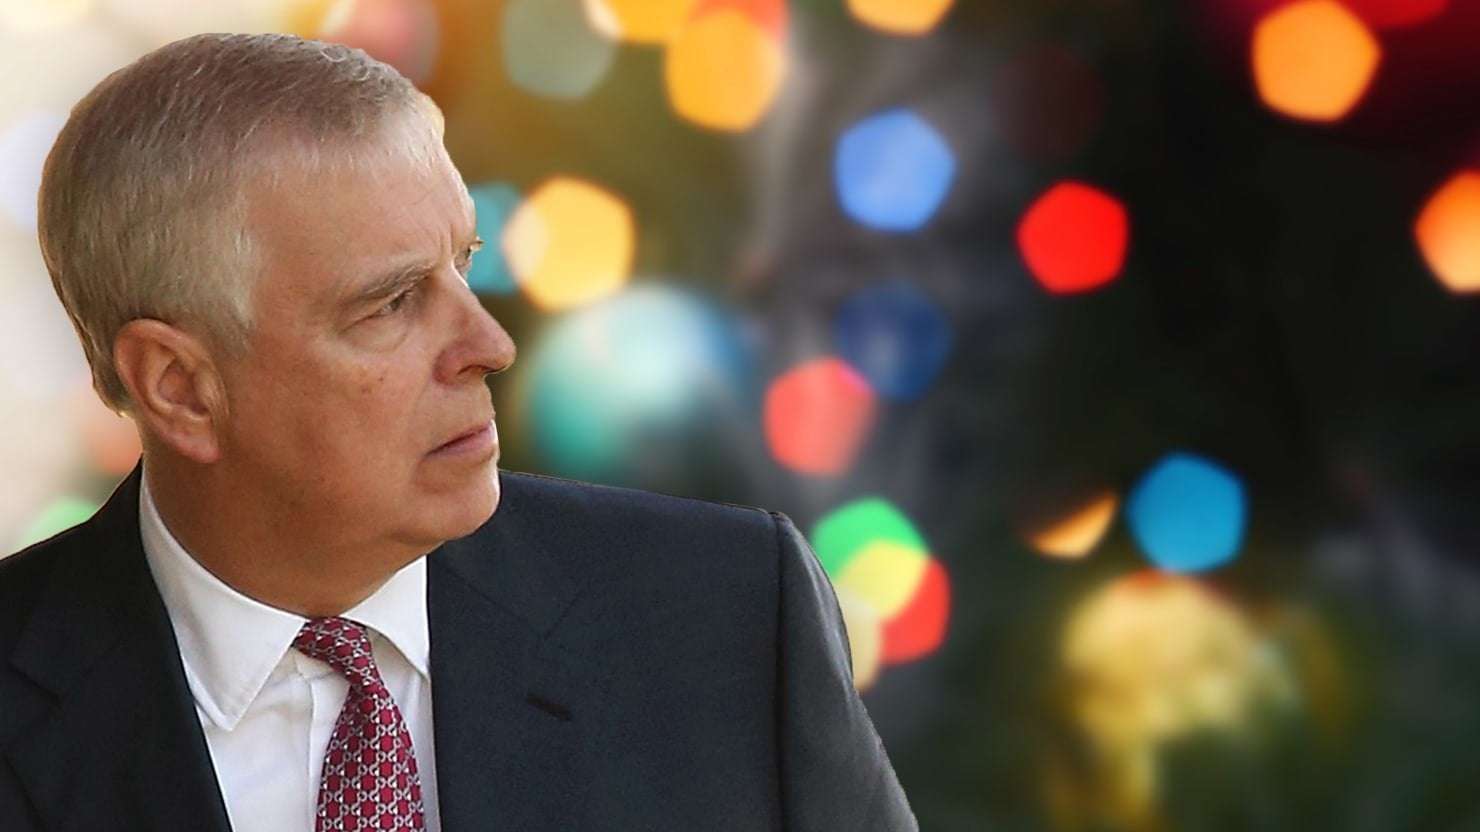 image for Prince Andrew, Disgraced by His Friendship With Jeffrey Epstein, is Left Out in The Christmas Cold